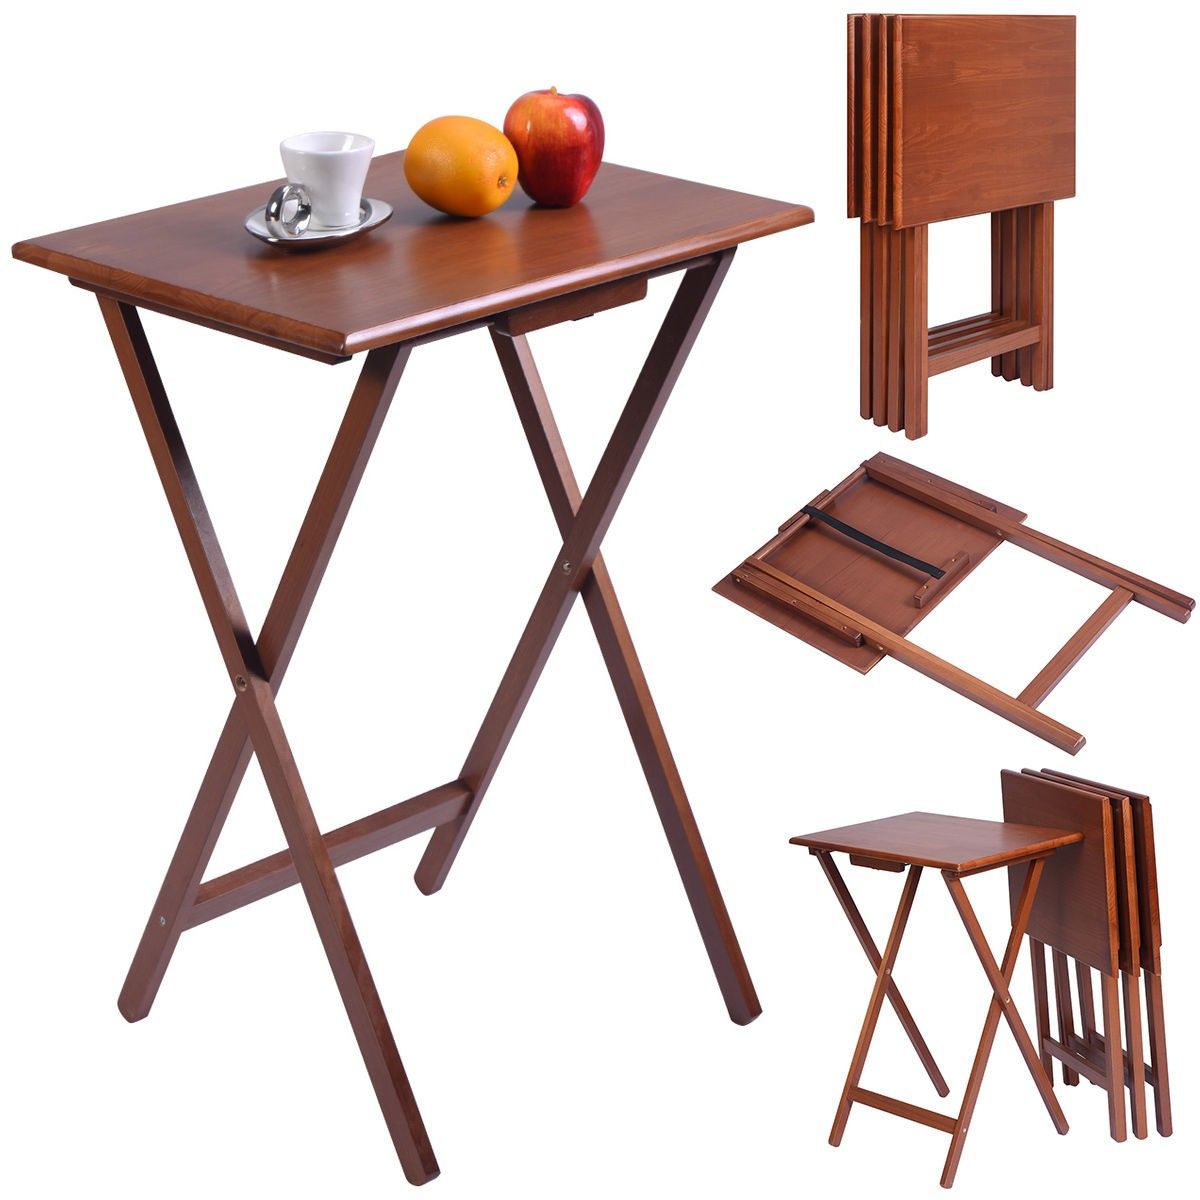 Set Of 4 Portable Wood Tv Table Folding Tray Desk Serving Within Folding Tv Tray Sets With Storage Stands (View 4 of 15)